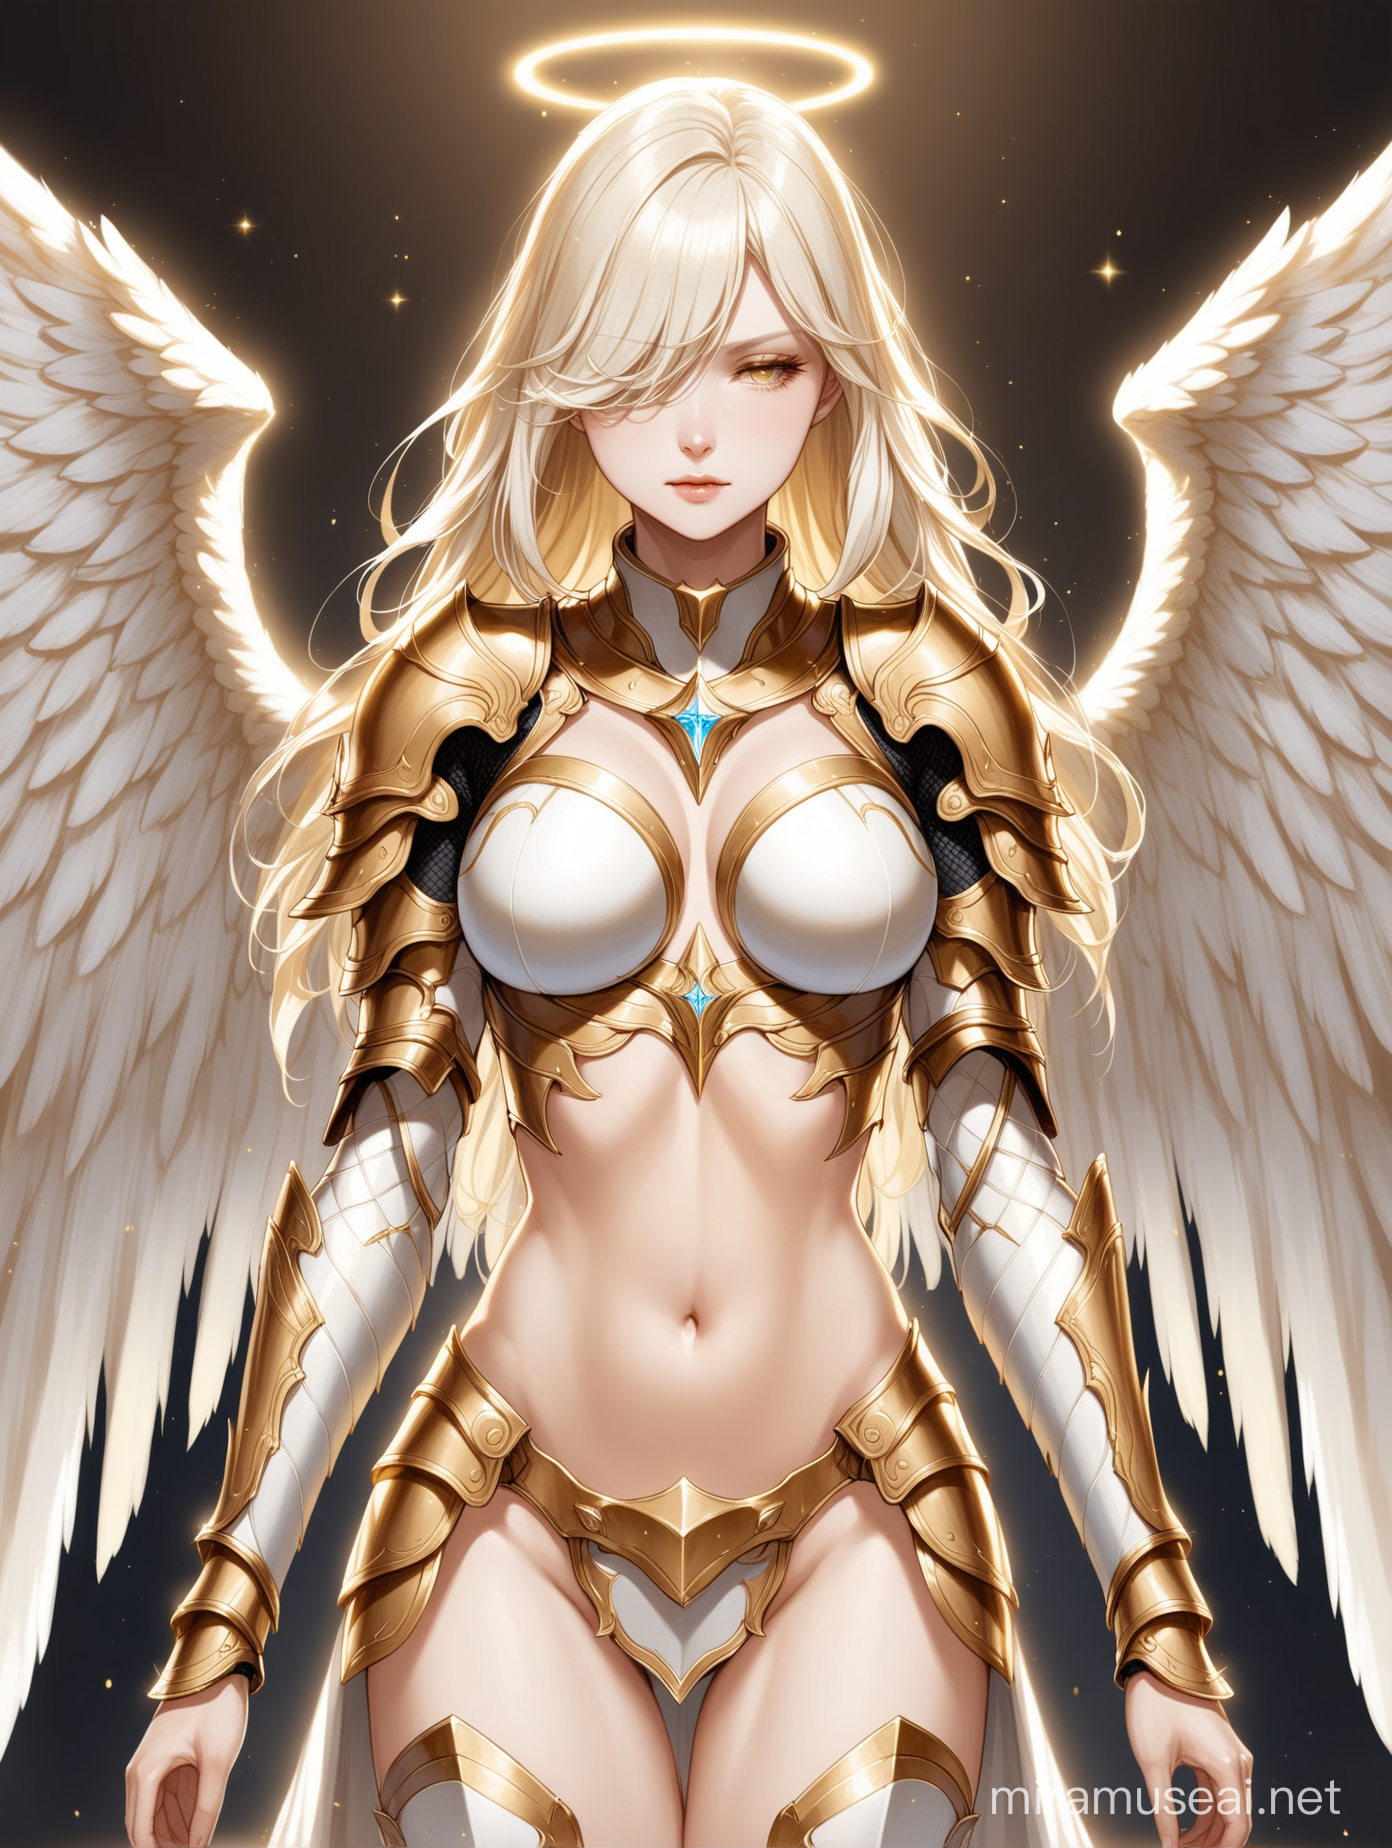 Valkyrie Angel Woman in Elegant White and Gold Armor